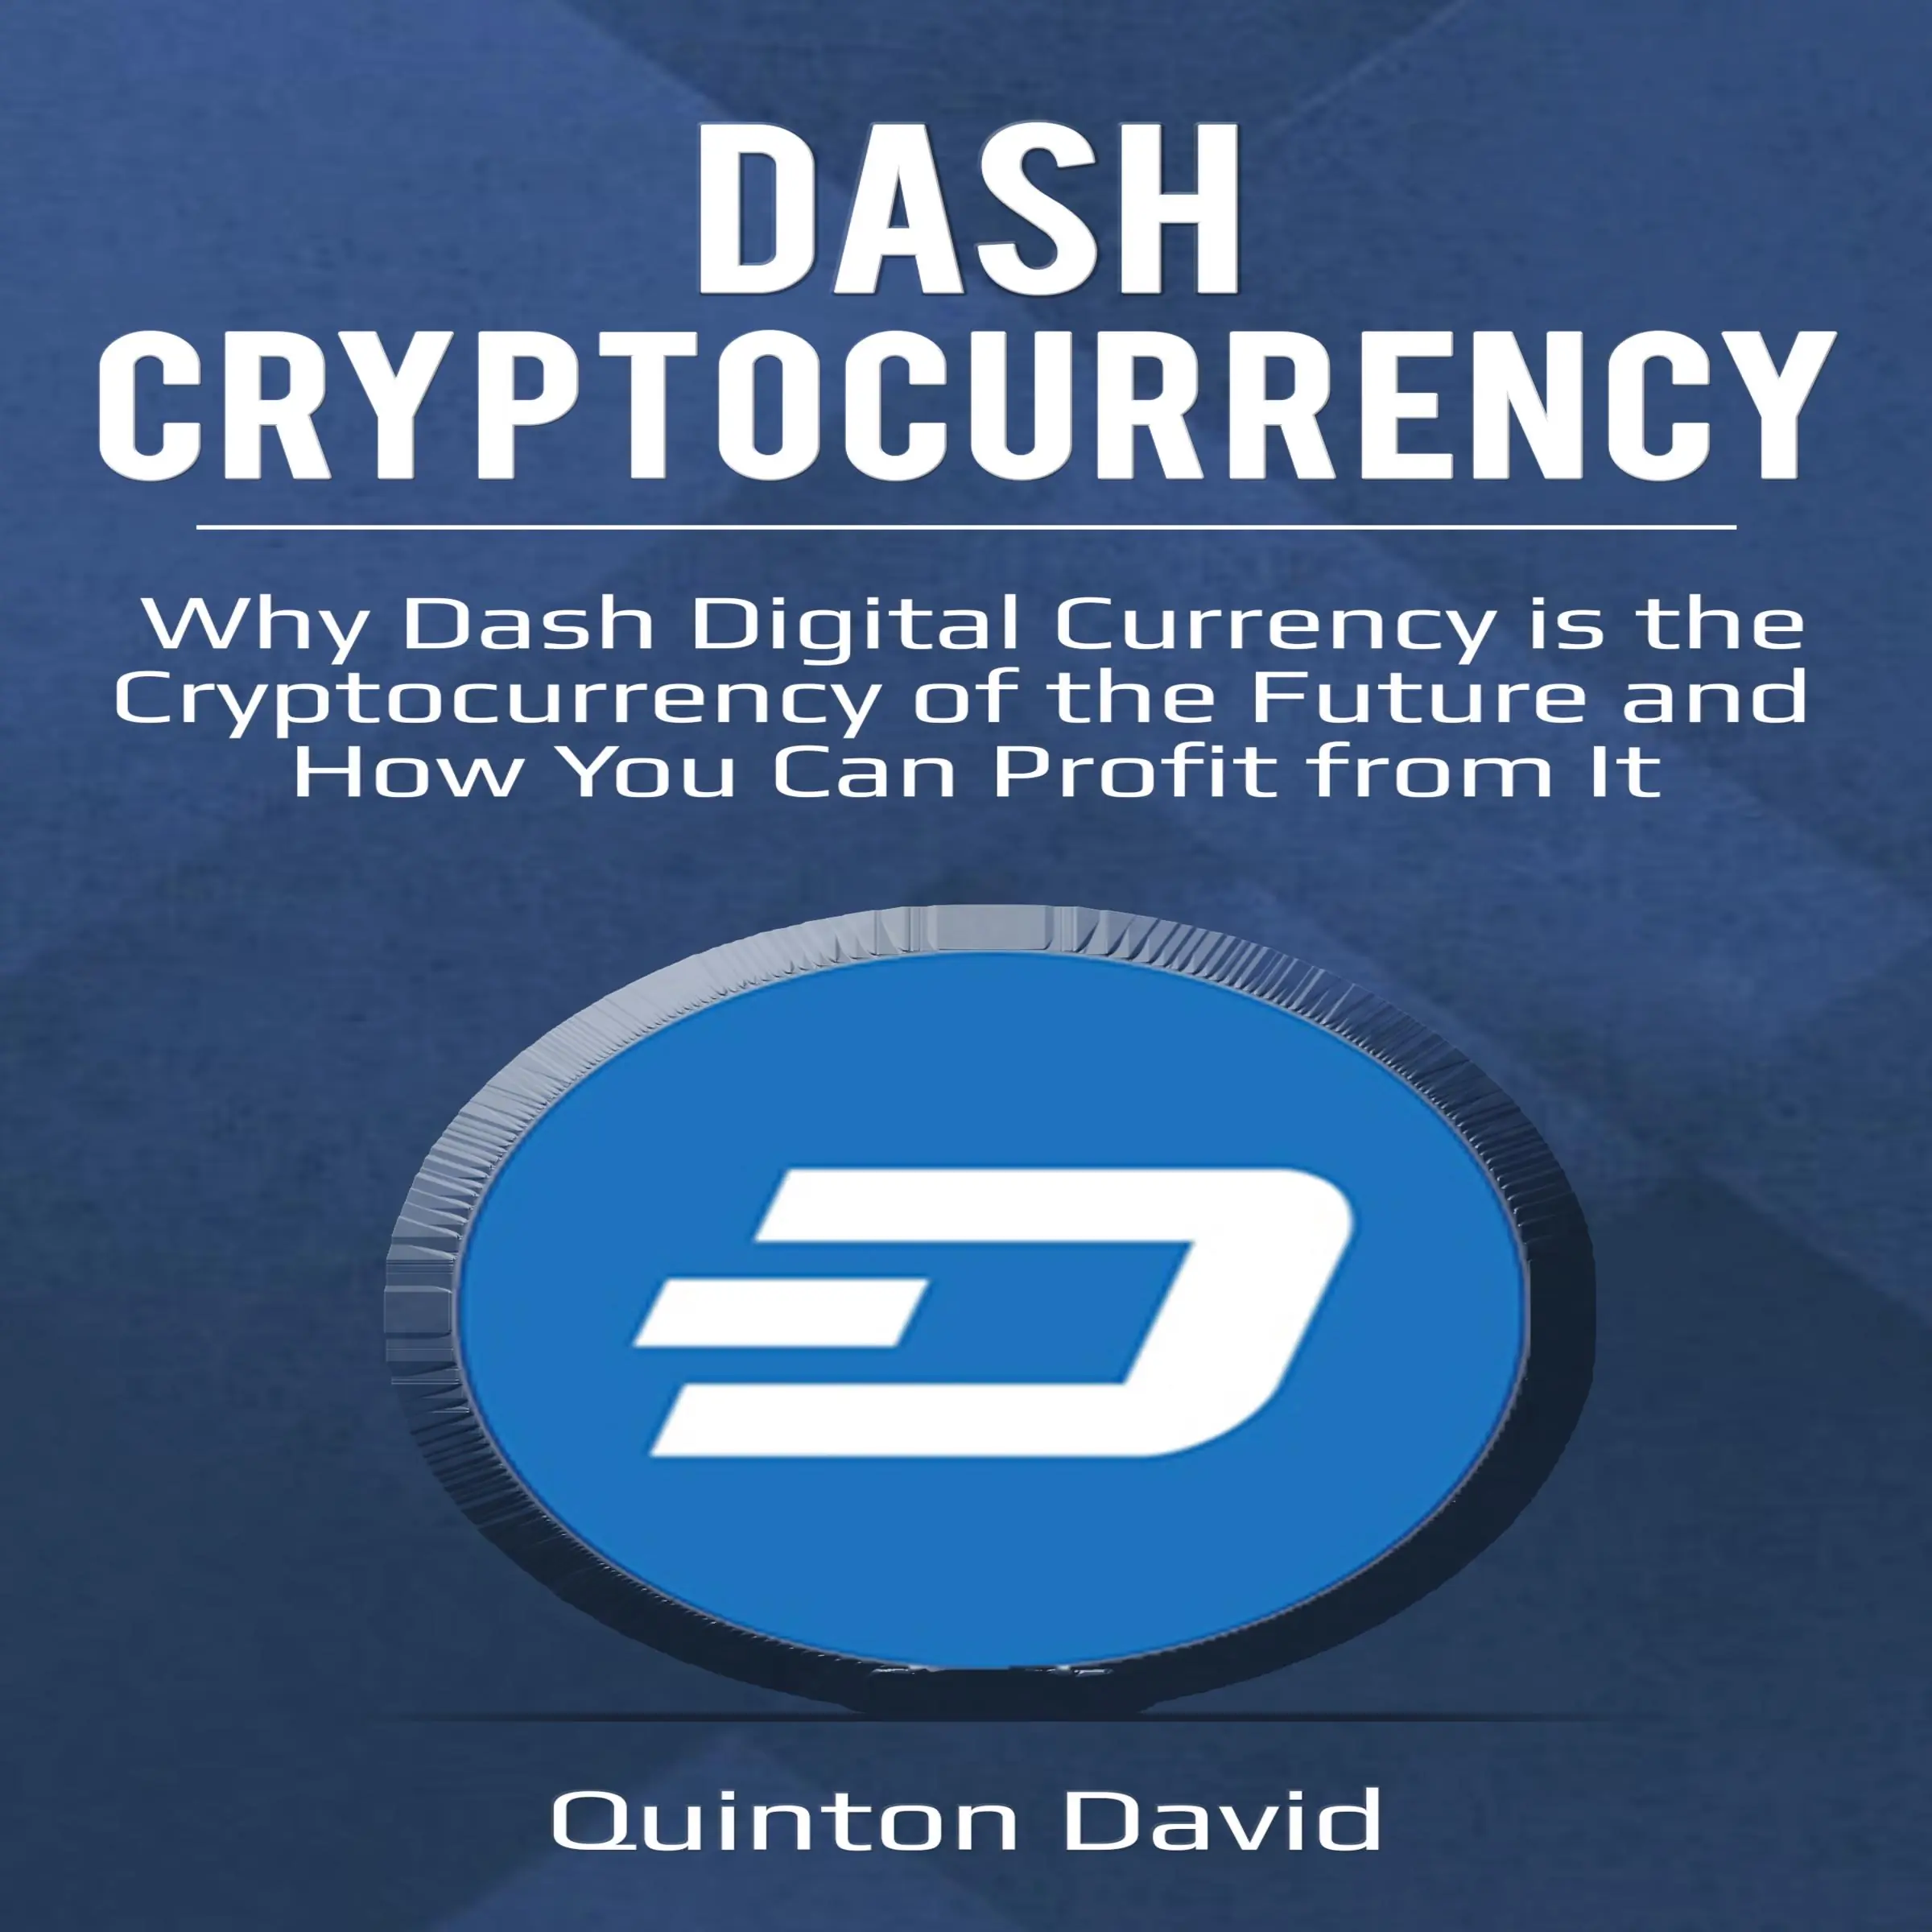 Dash Cryptocurrency: Why Dash Digital Currency is the Cryptocurrency of the Future and How You Can Profit from It by Quinton David Audiobook